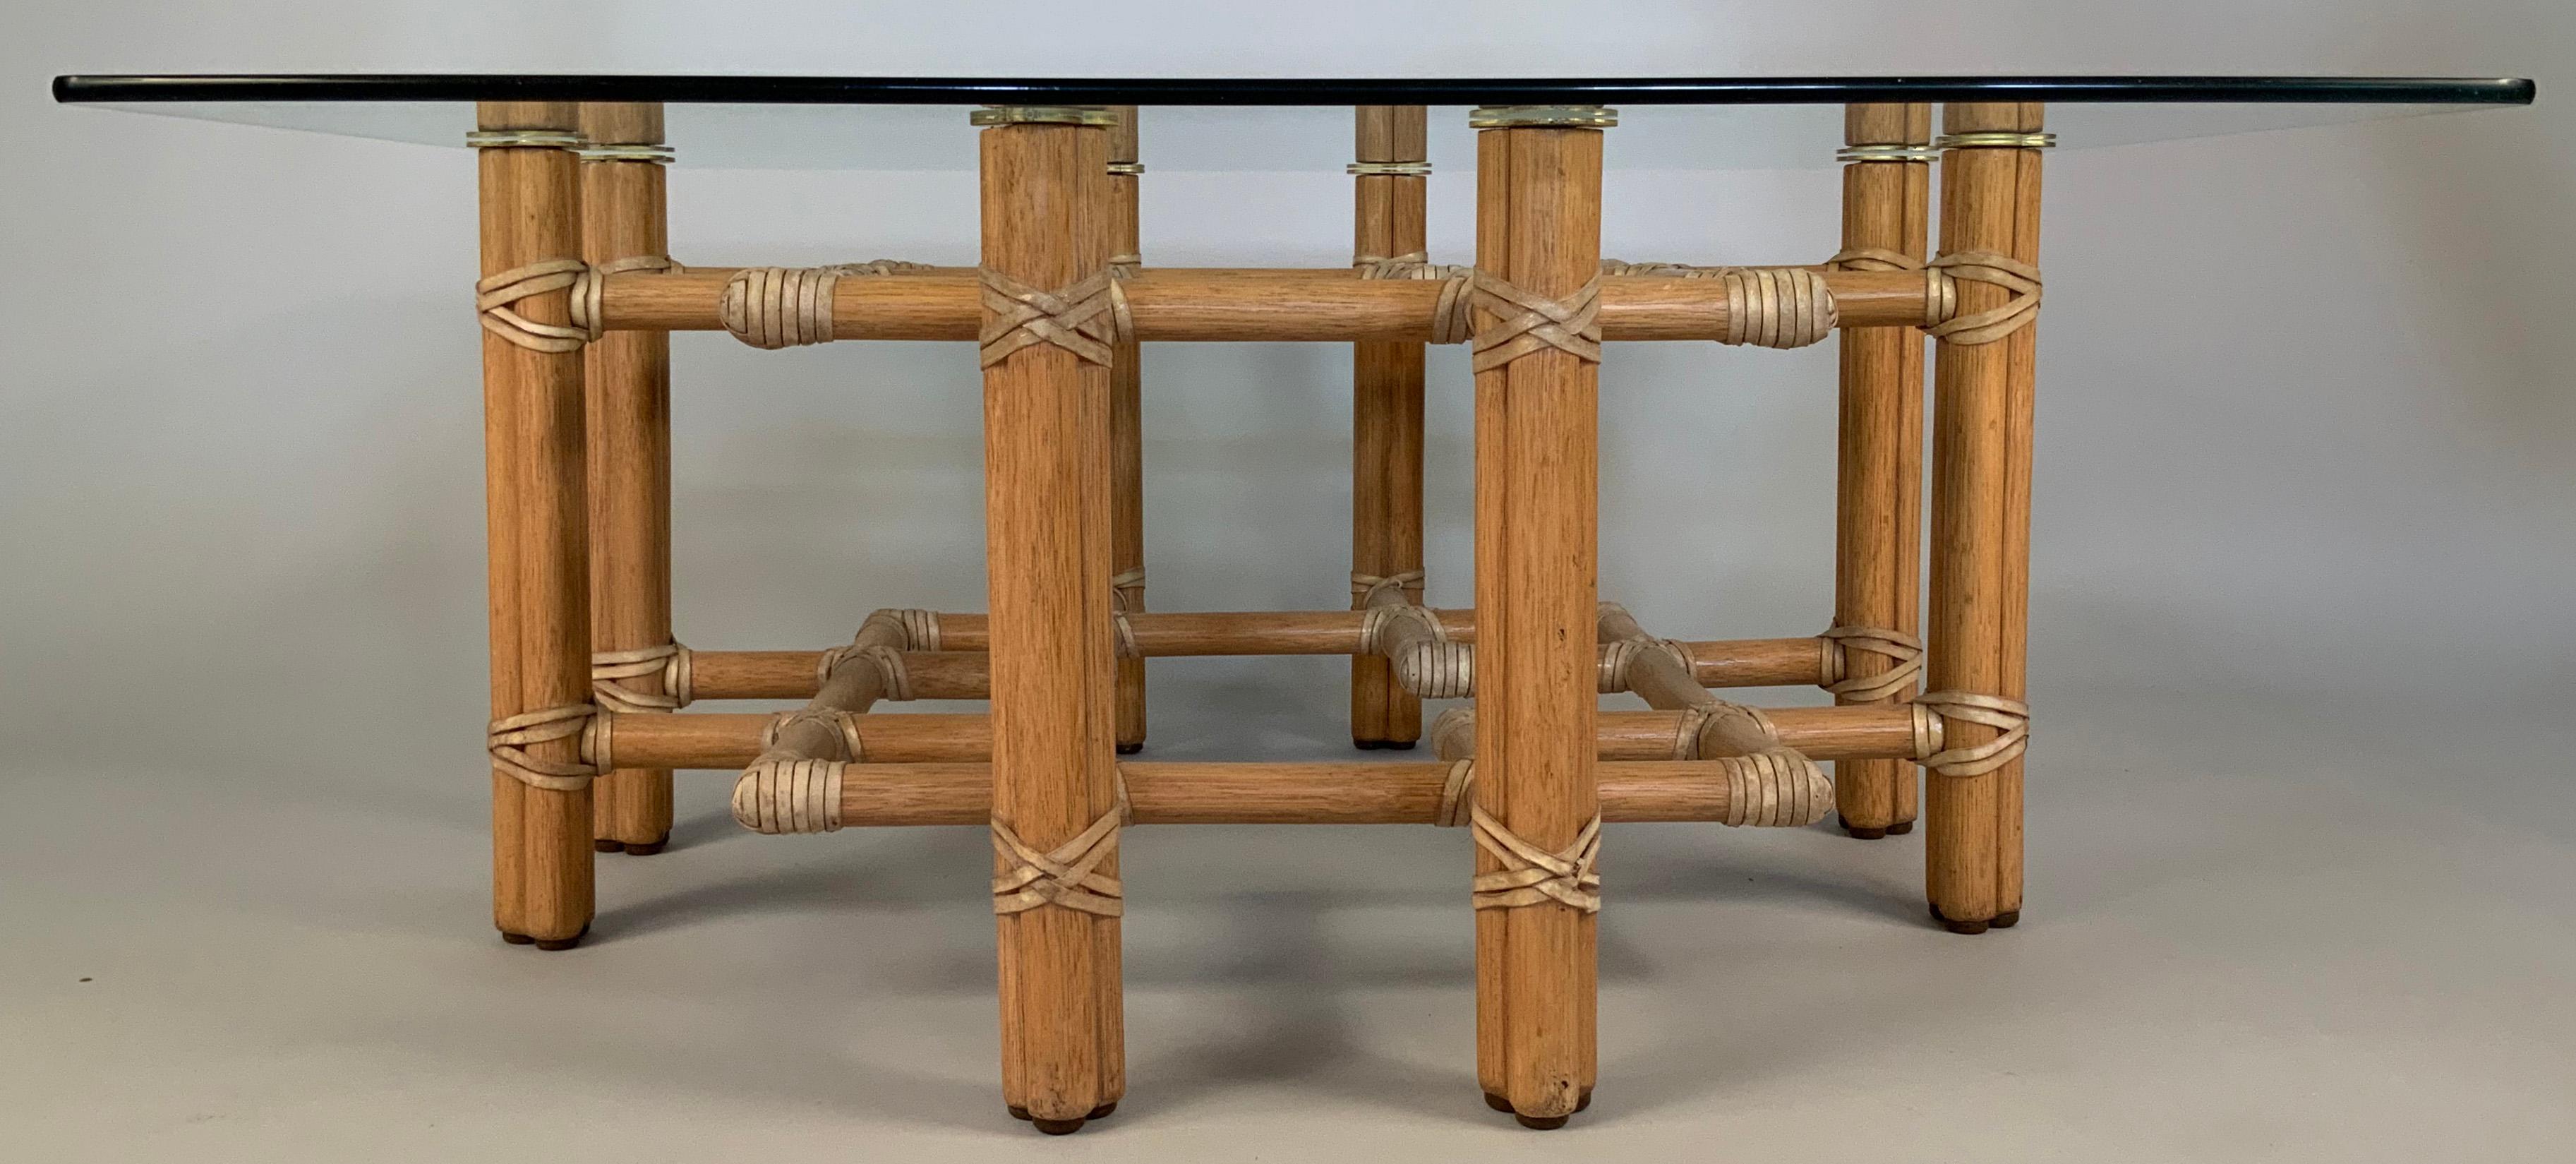 A beautiful vintage 1970s coffee table by McGuire of San Francisco, with a base of rattan and bamboo, with leather lacing, in an intricate double square design, supporting a square glass top. The tops of the base are finished with eight solid brass